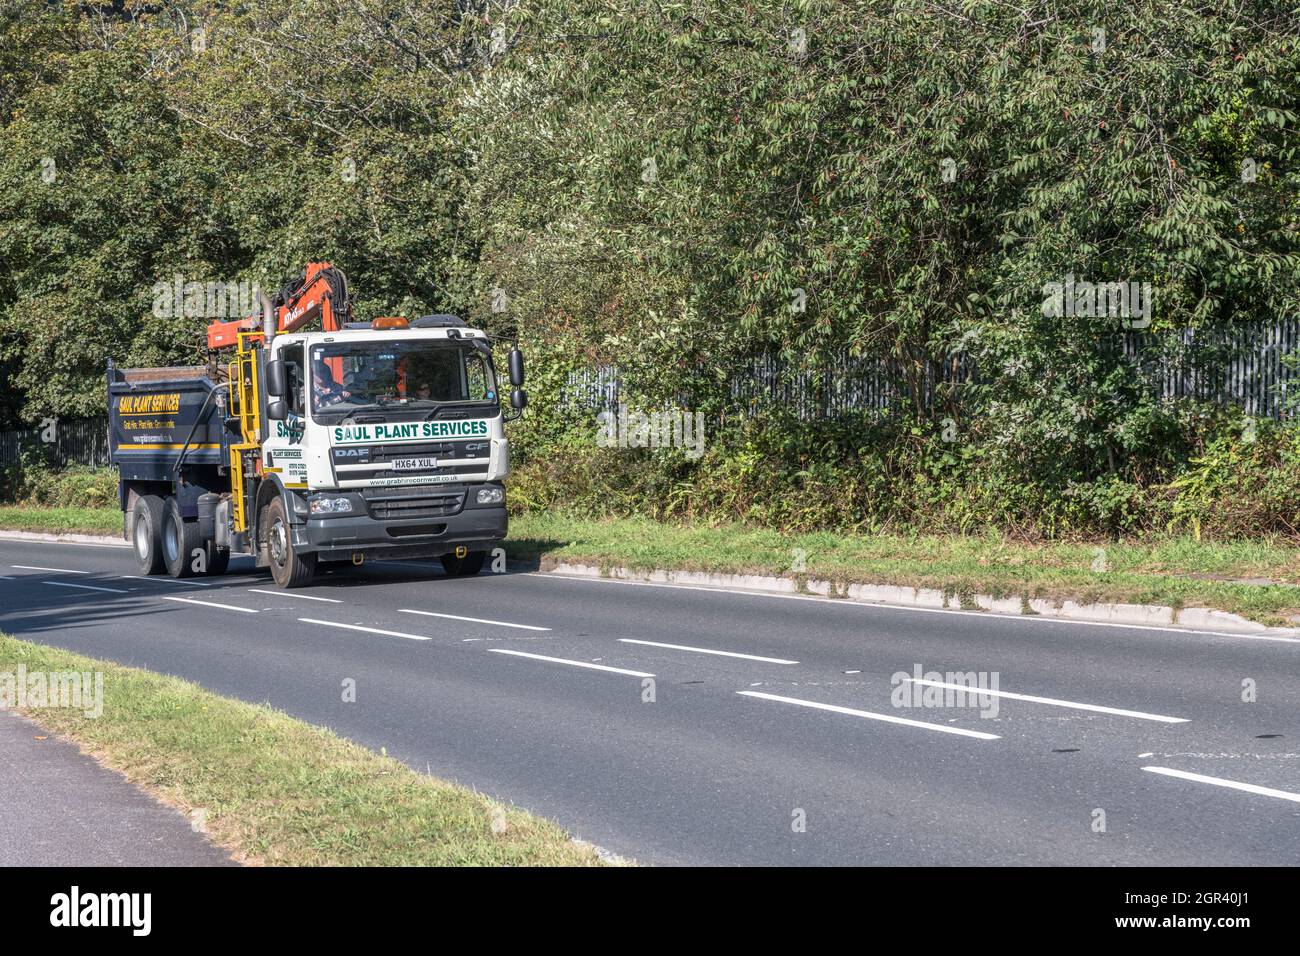 DAF CF 75.310 travelling uphill on a country road. Belongs to a company involved in building trade (/ supplies or plant hire). For UK construction. Stock Photo